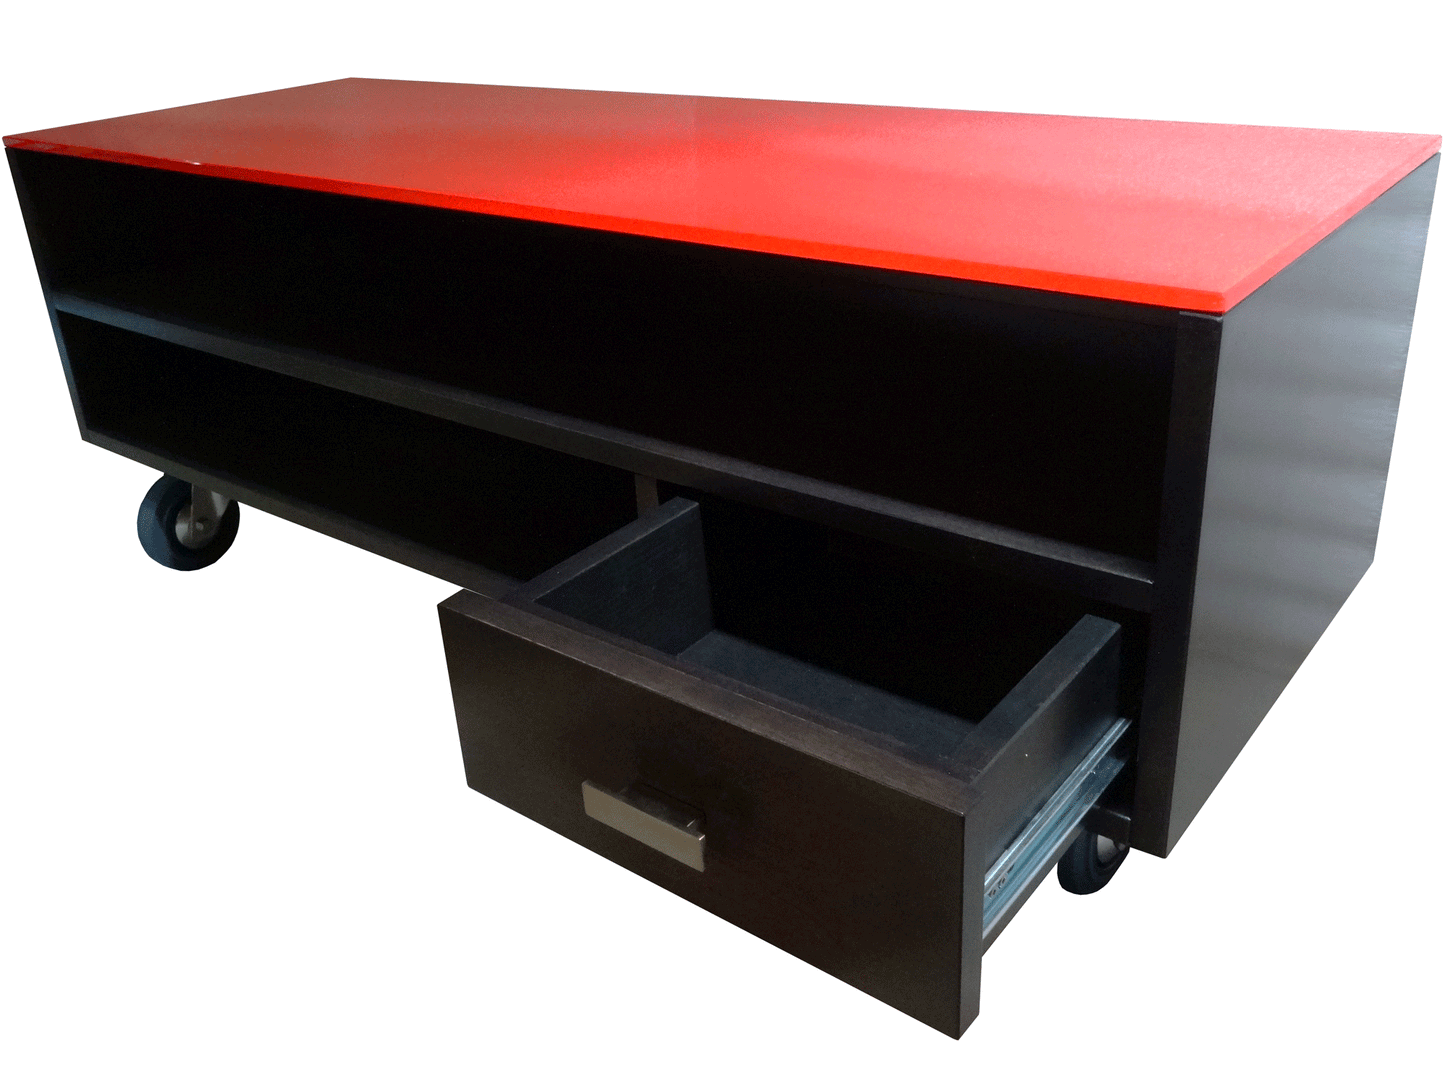 Muse Entertainment unit - shown with open drawer